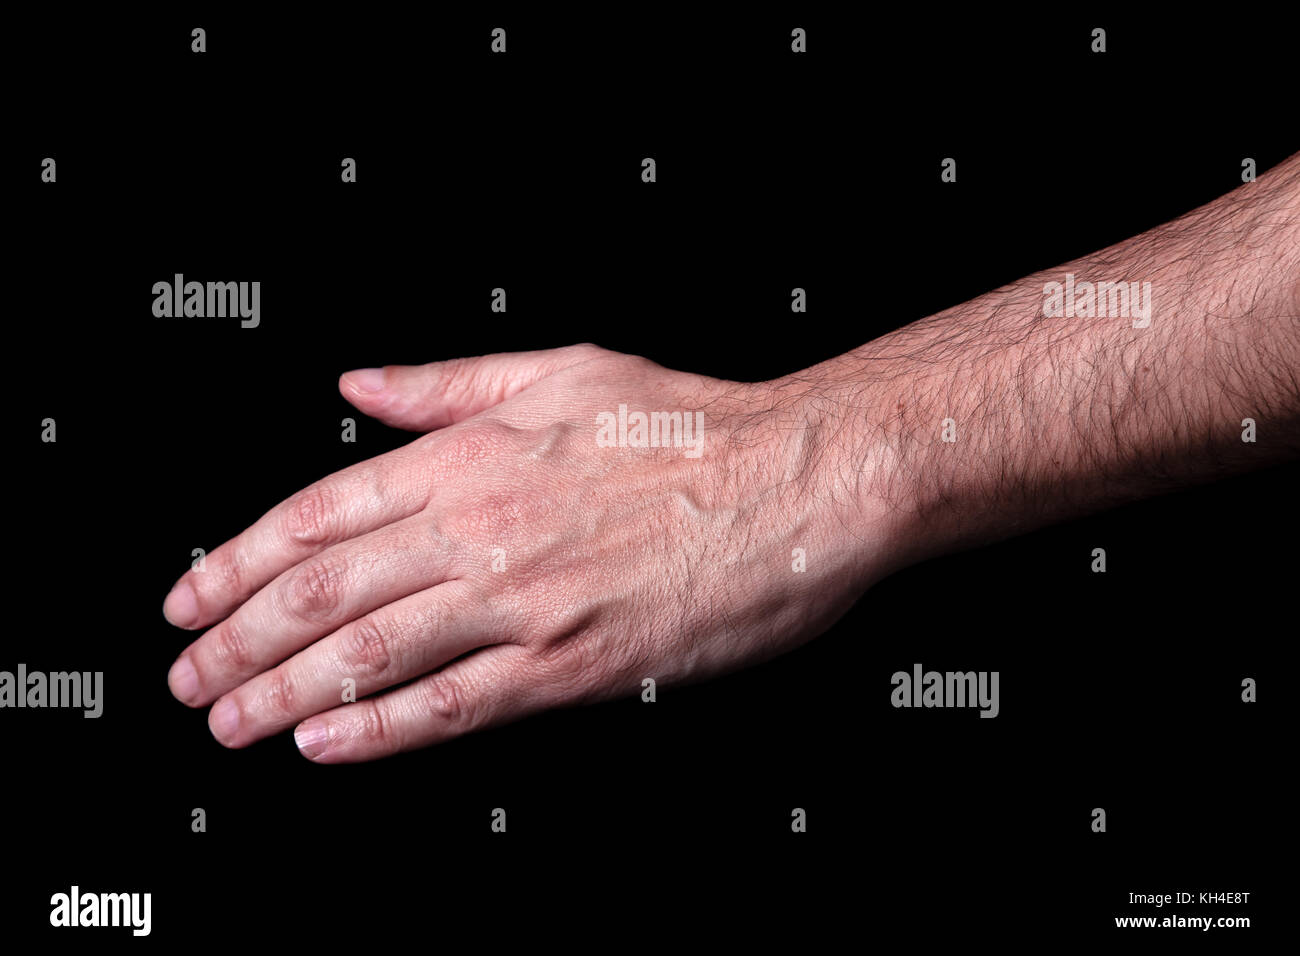 Male hand reaching or pointing down. Black background. Concept for salvation rescue friendship guidance help helping hands reaching down hope rescue Stock Photo